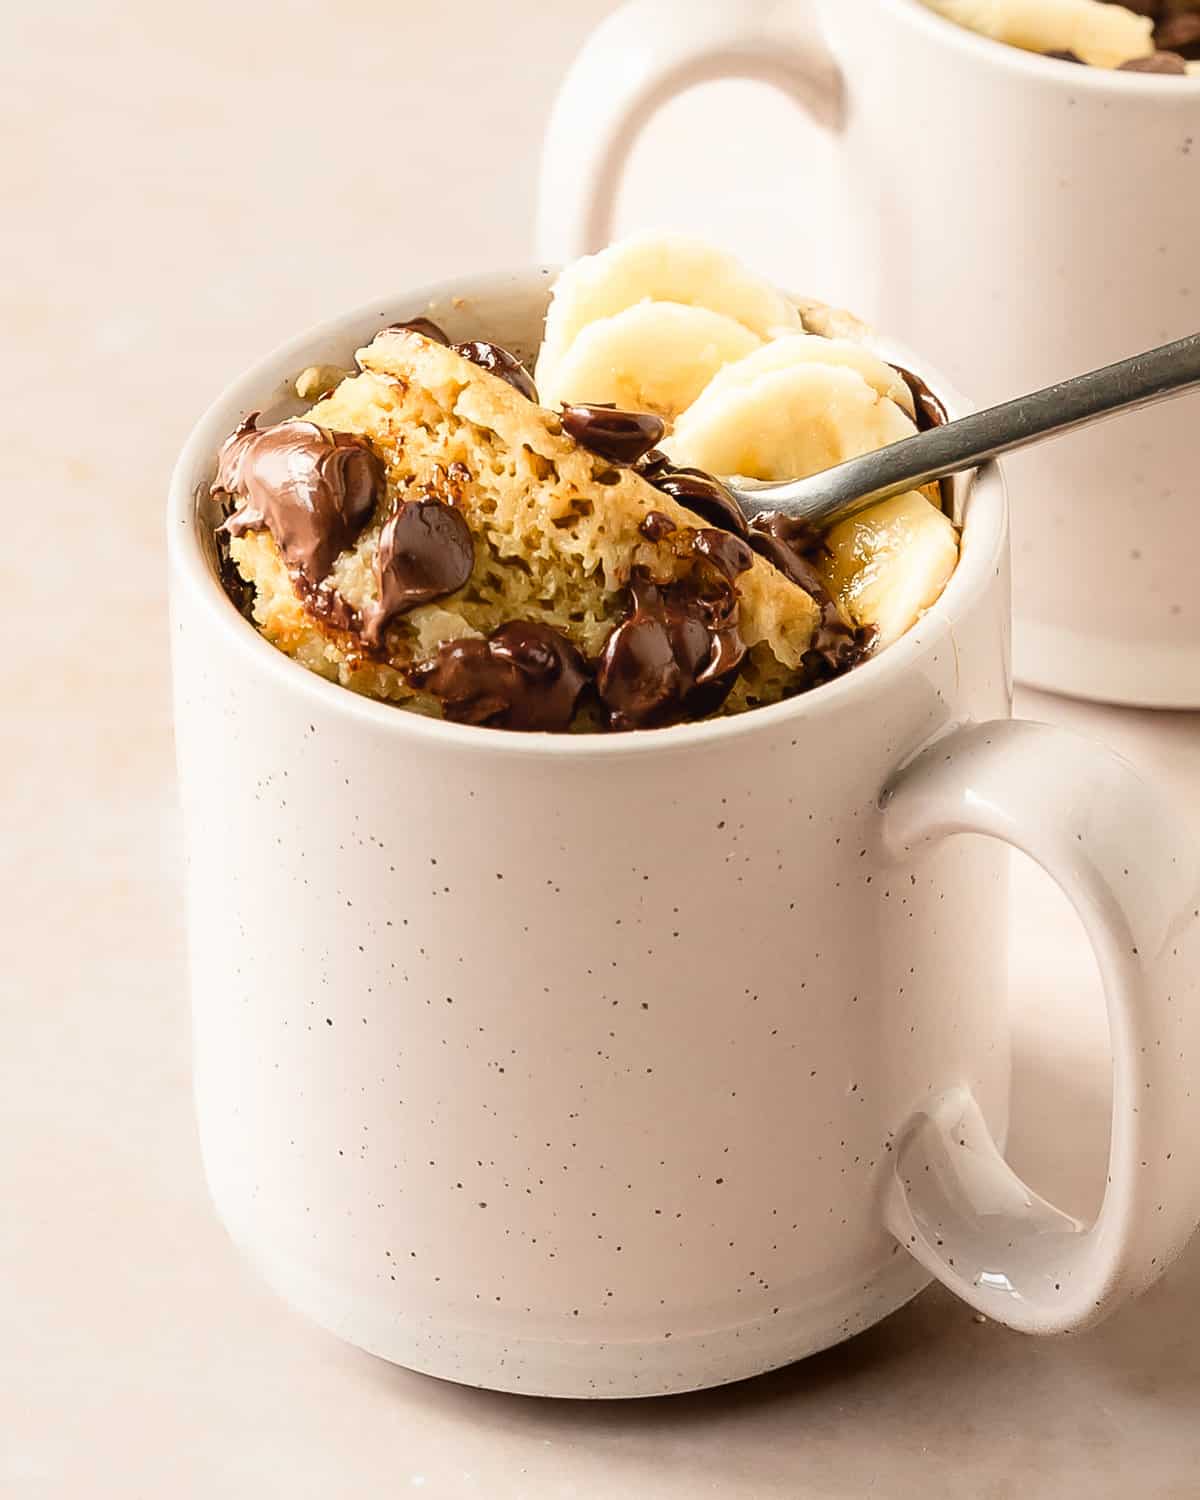 Banana mug cake is a moist, fluffy and super easy mug cake recipe that takes under 5 minutes to make. This banana cake in a mug is especially delicious when topped with lots of melty chocolate chips. Make this cozy banana bread in a mug cake for the perfect single serve breakfast, snack or dessert. 